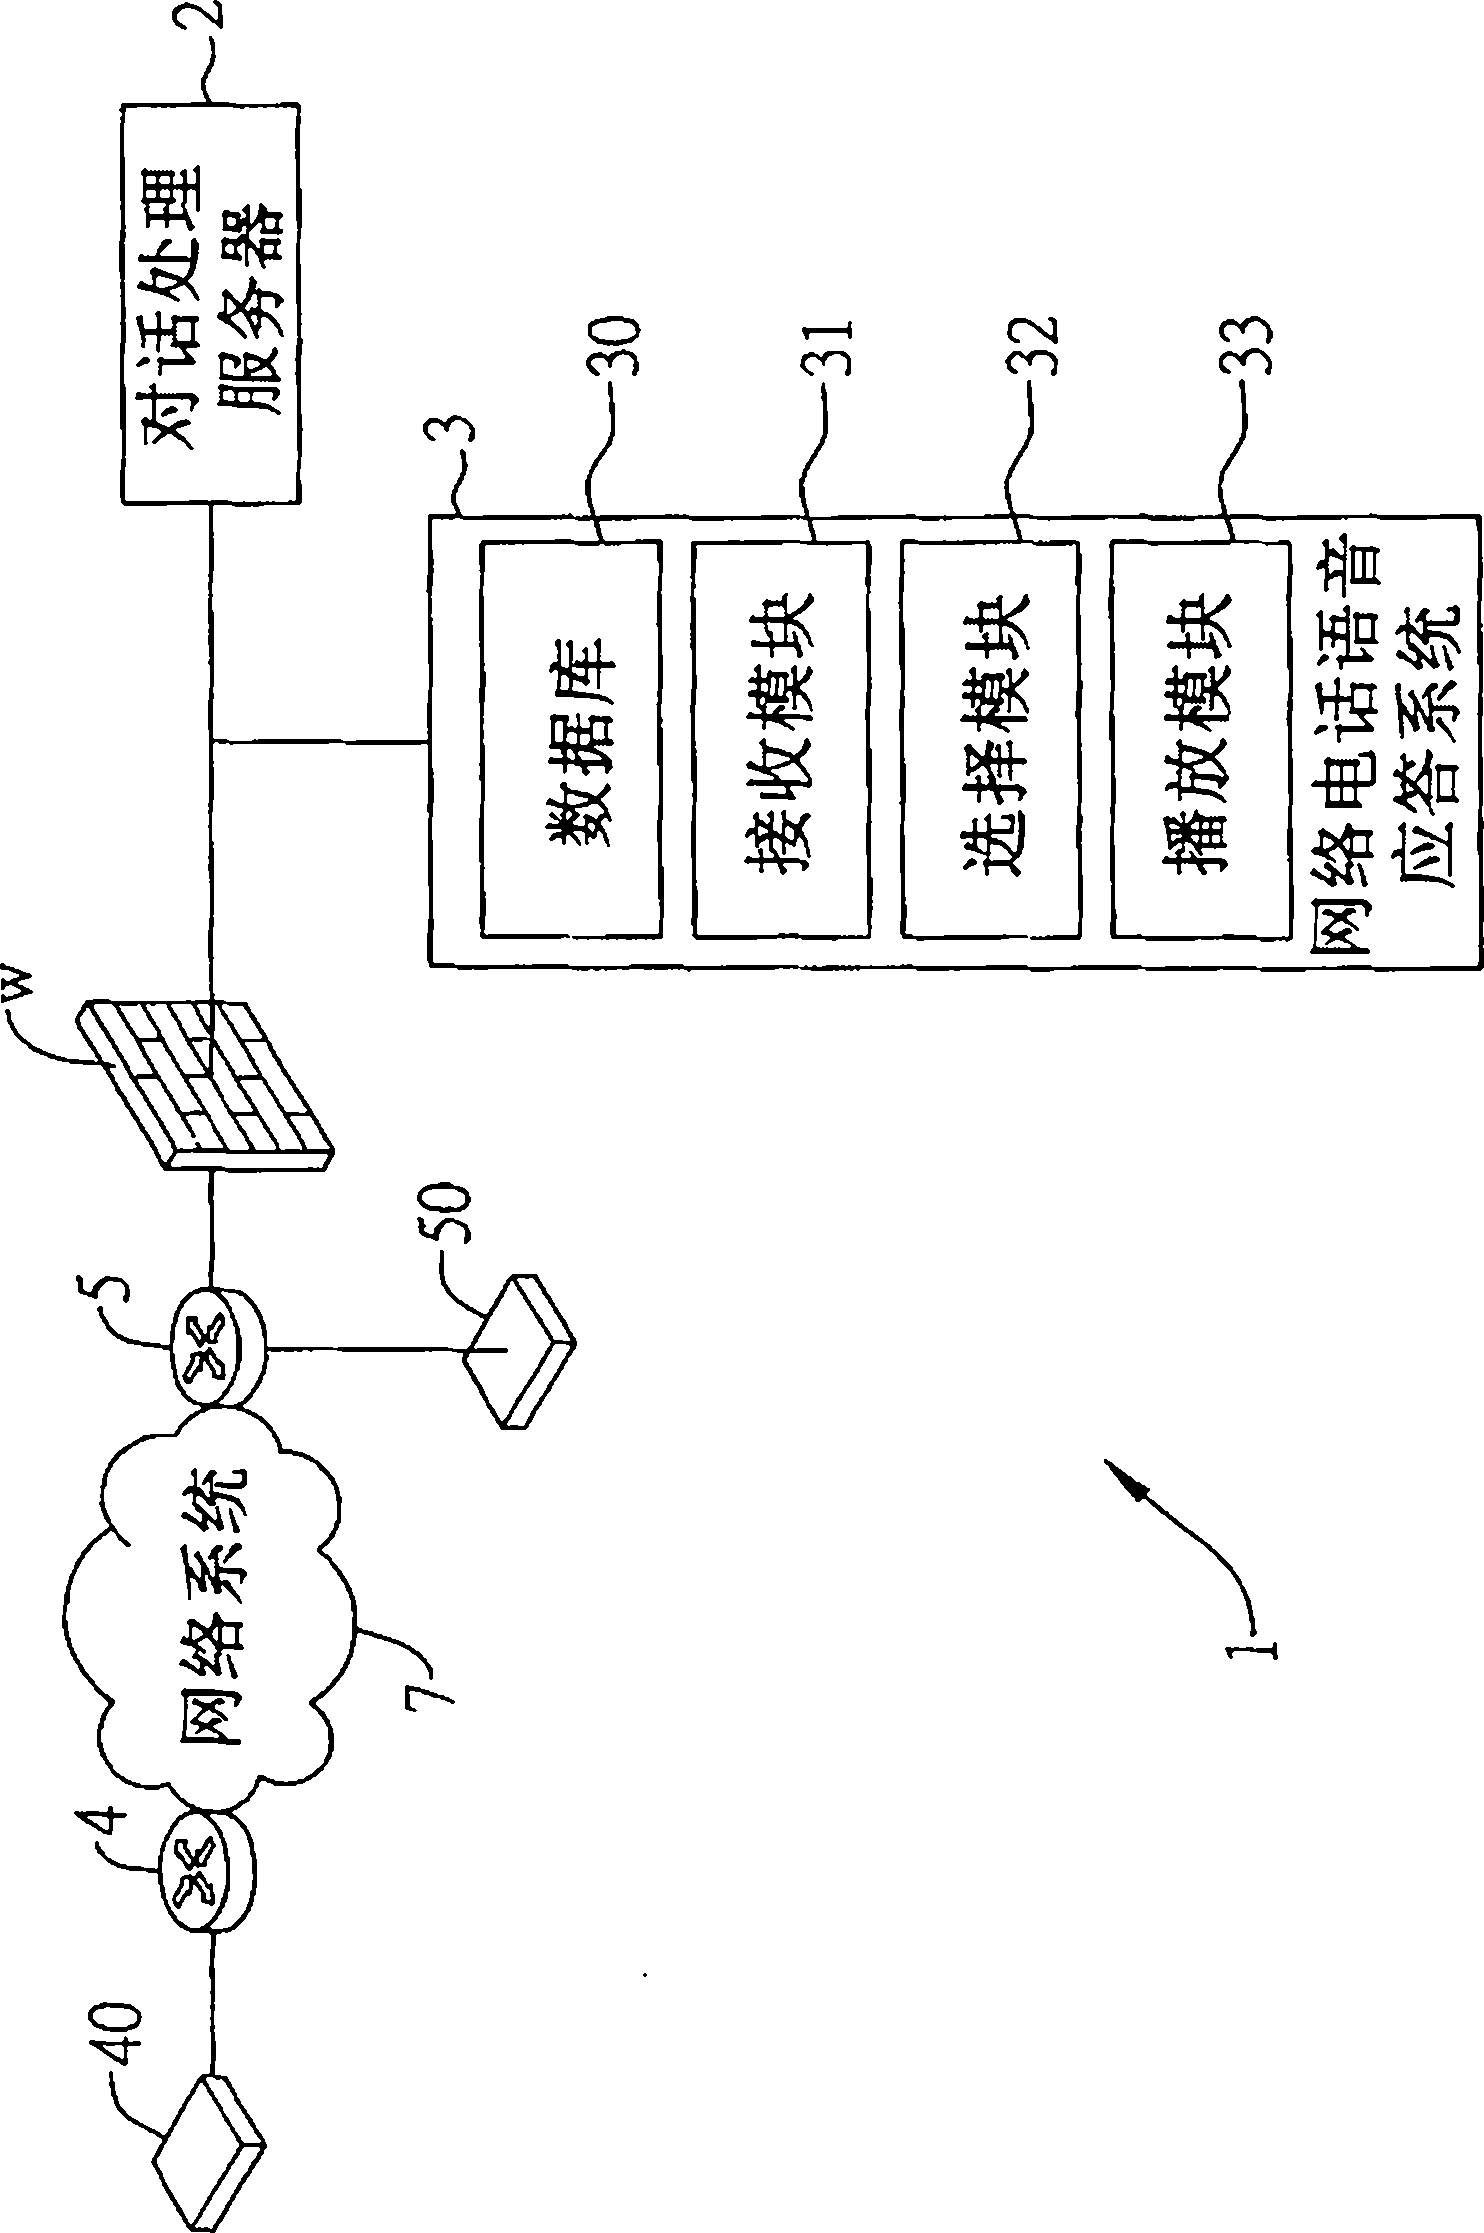 VoIP voice response system and method